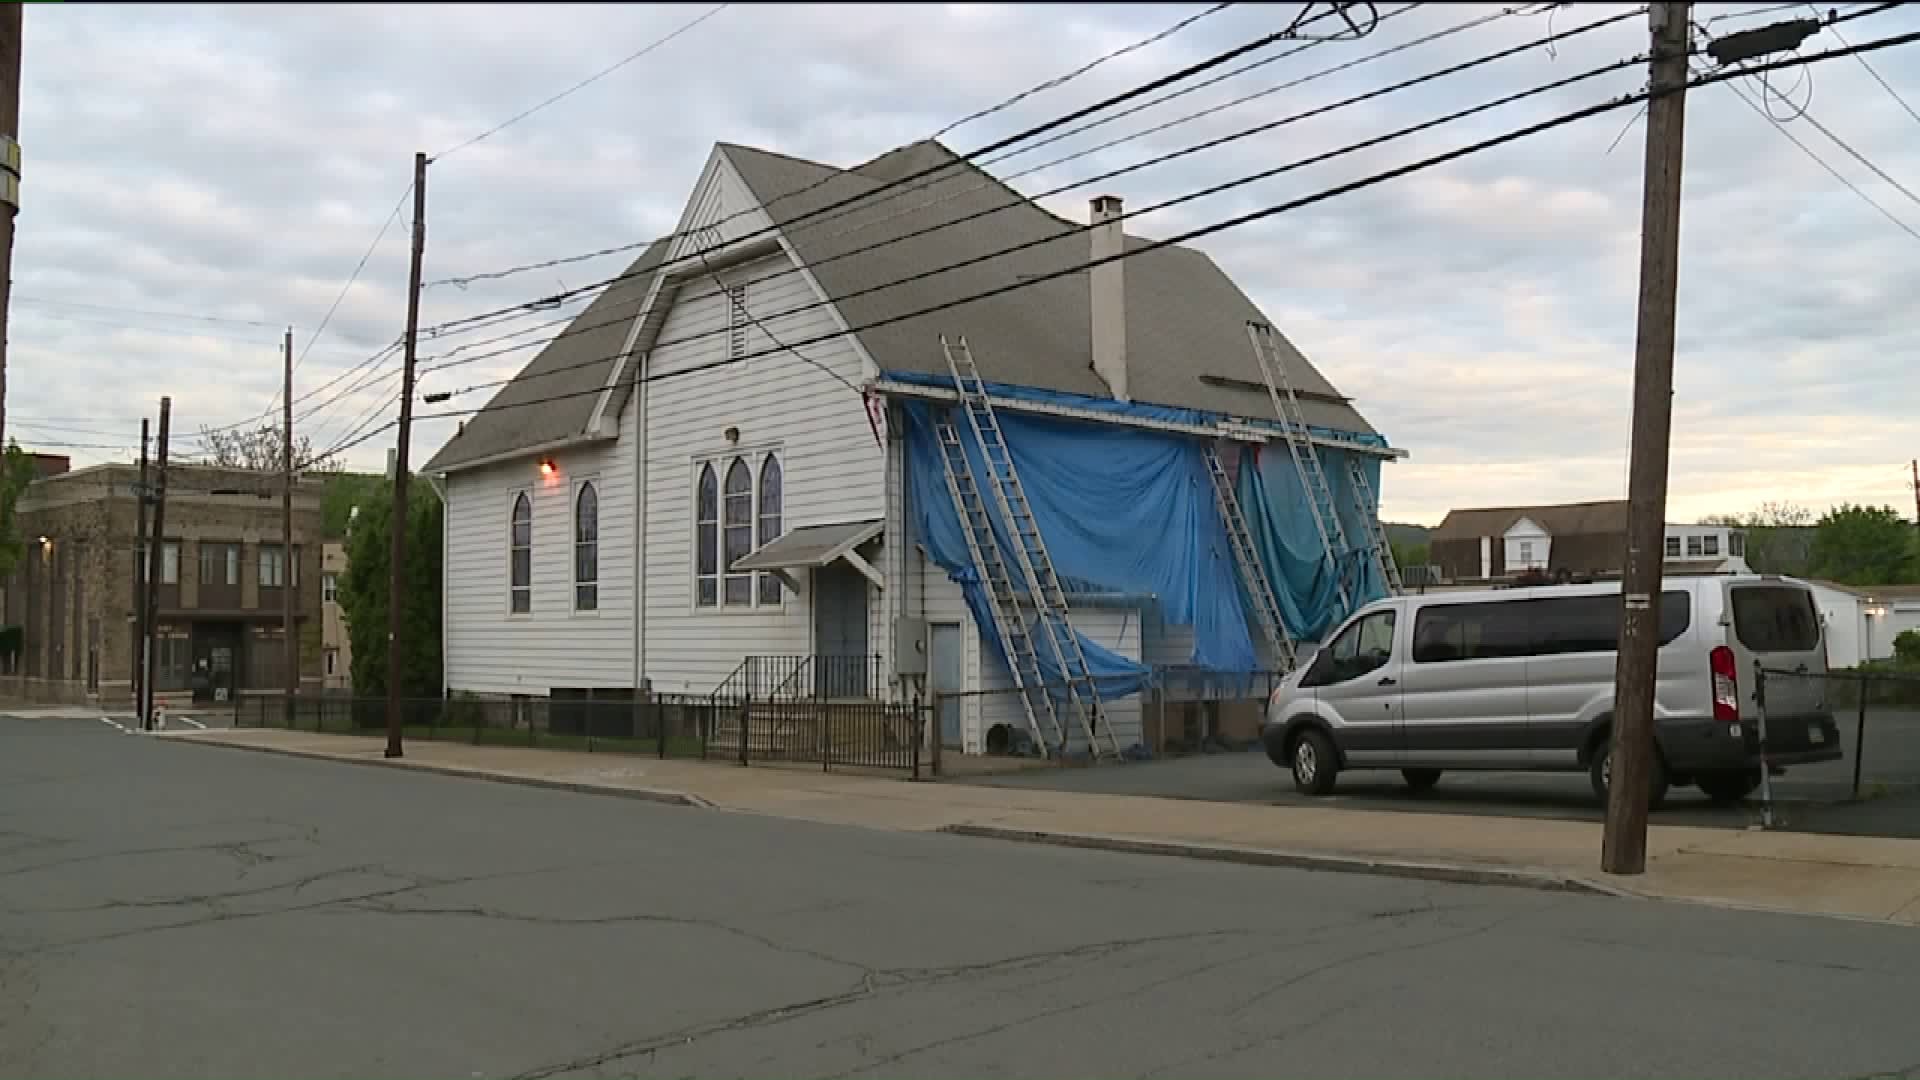 Roofing Shingles Swiped From Church in Wilkes-Barre